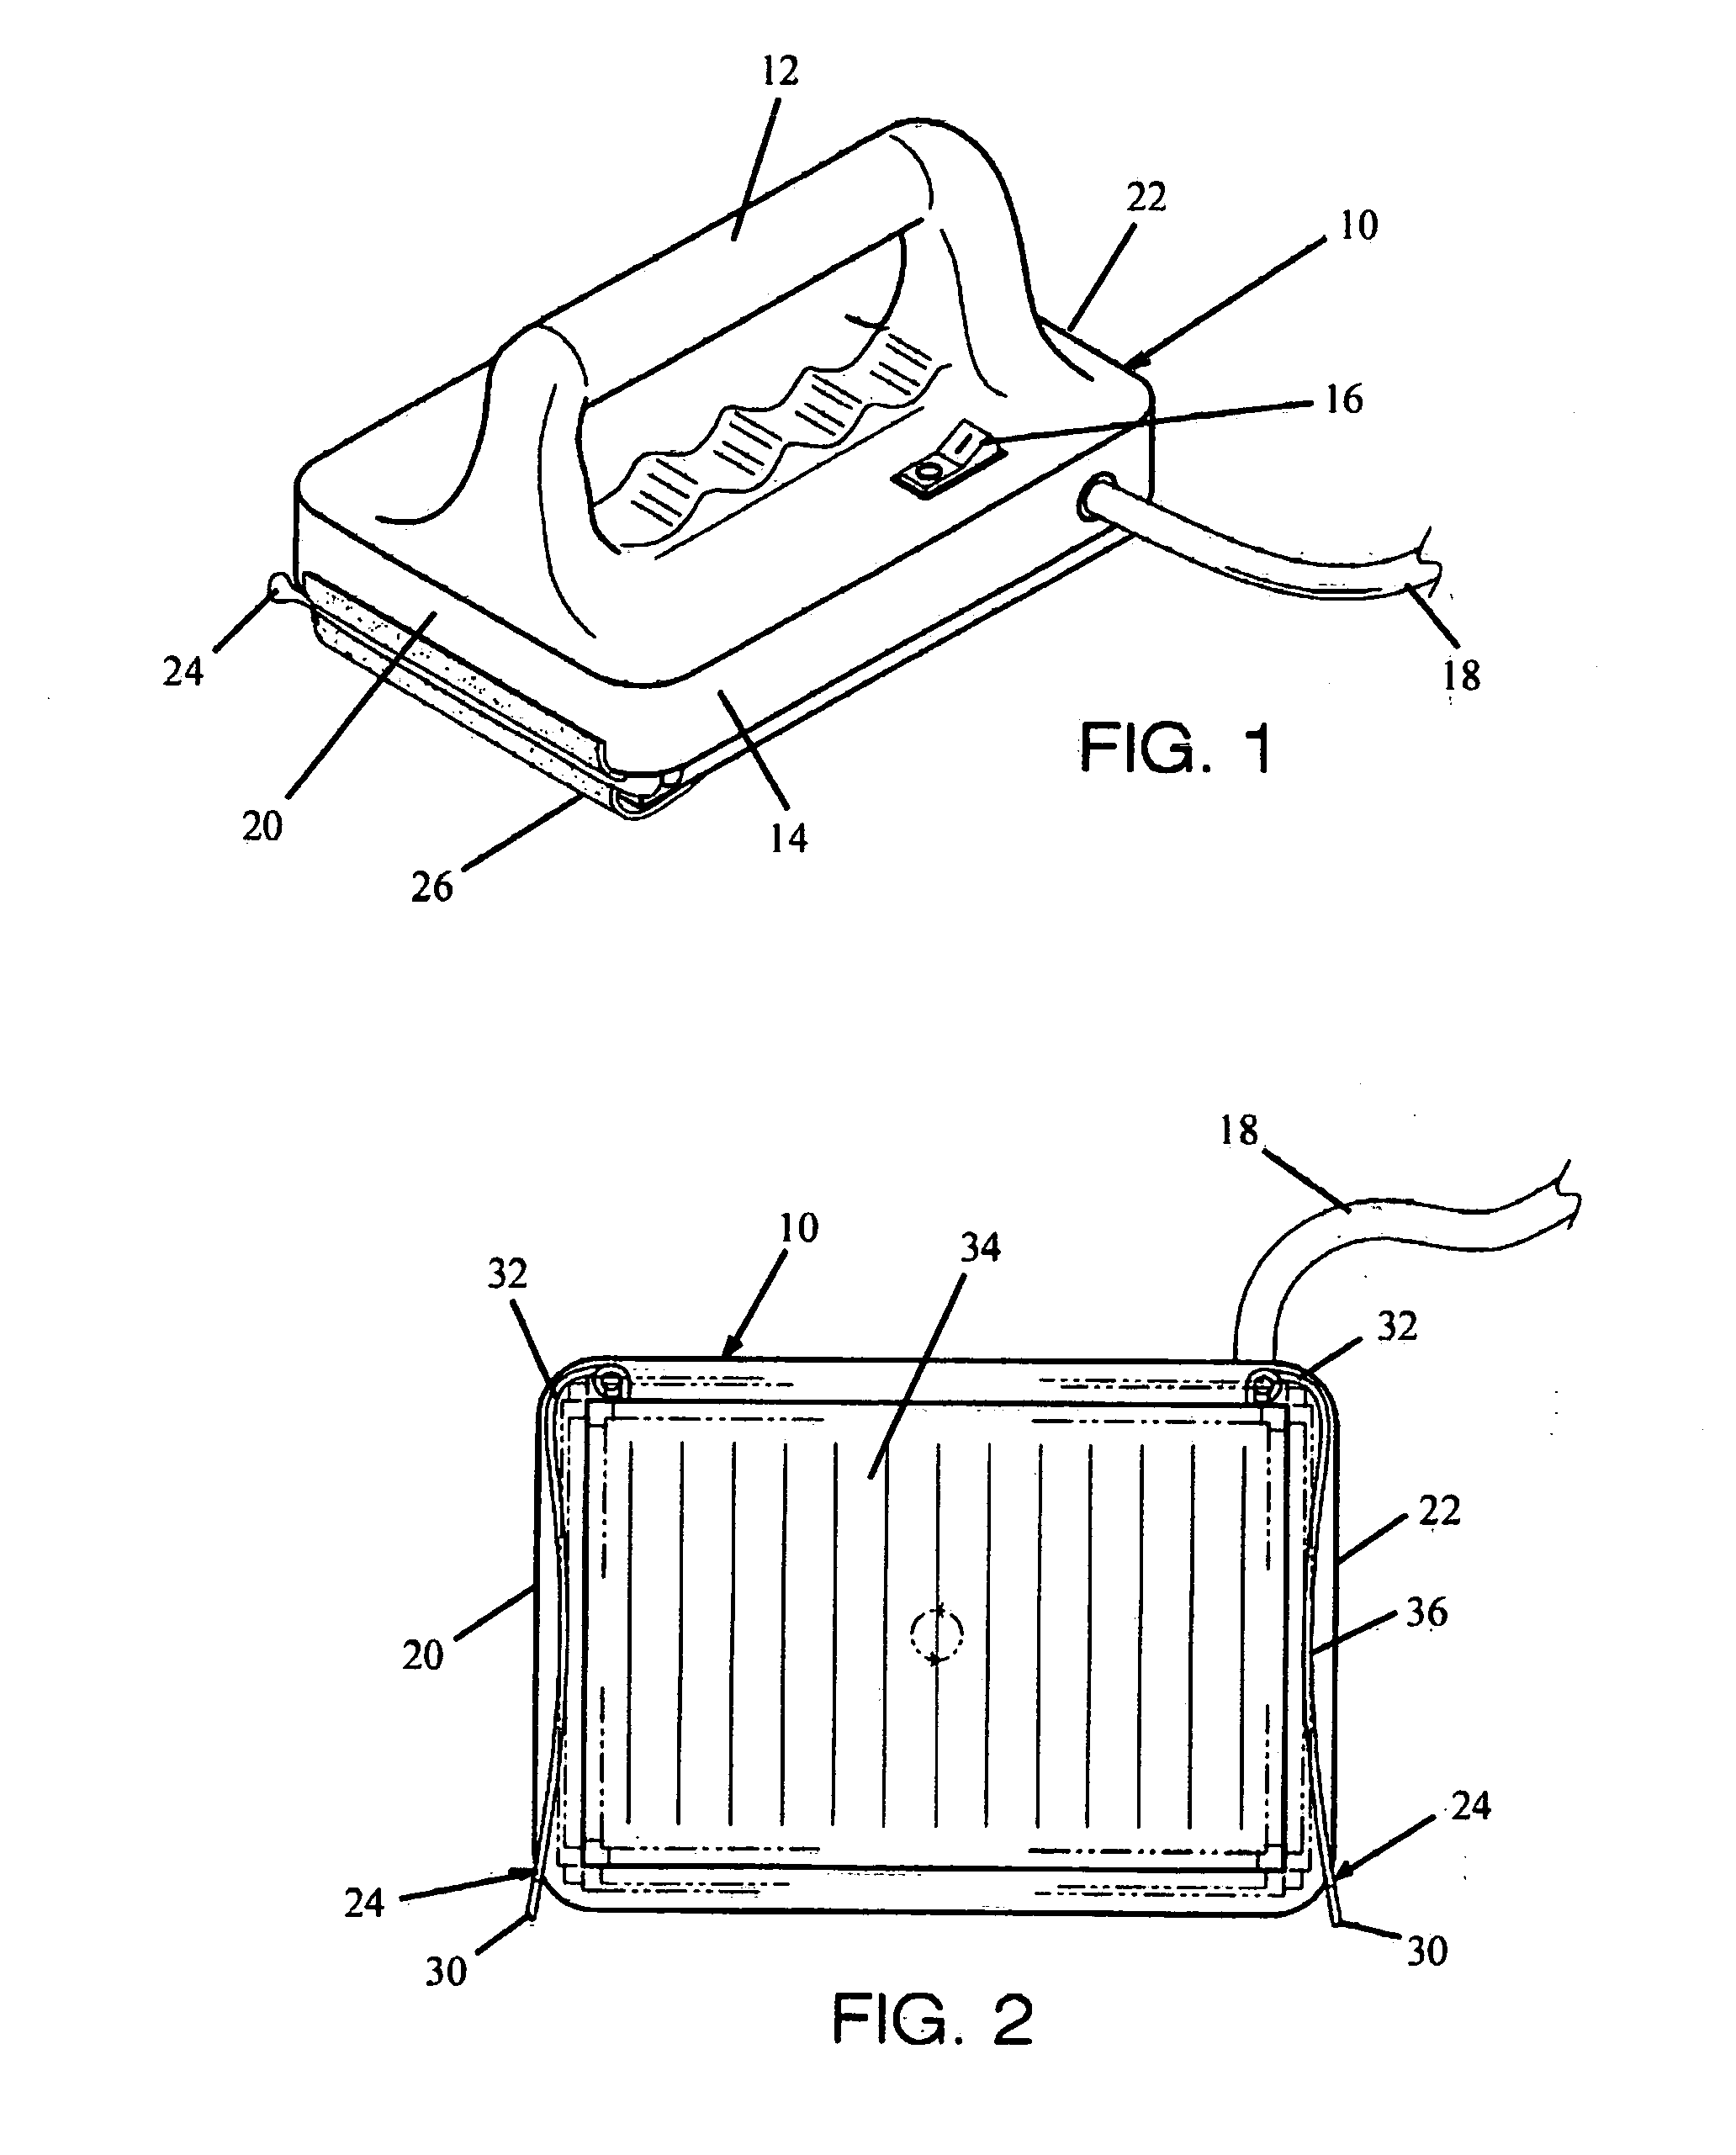 Skin treatment device and method for exfoliation and cellulite reduction